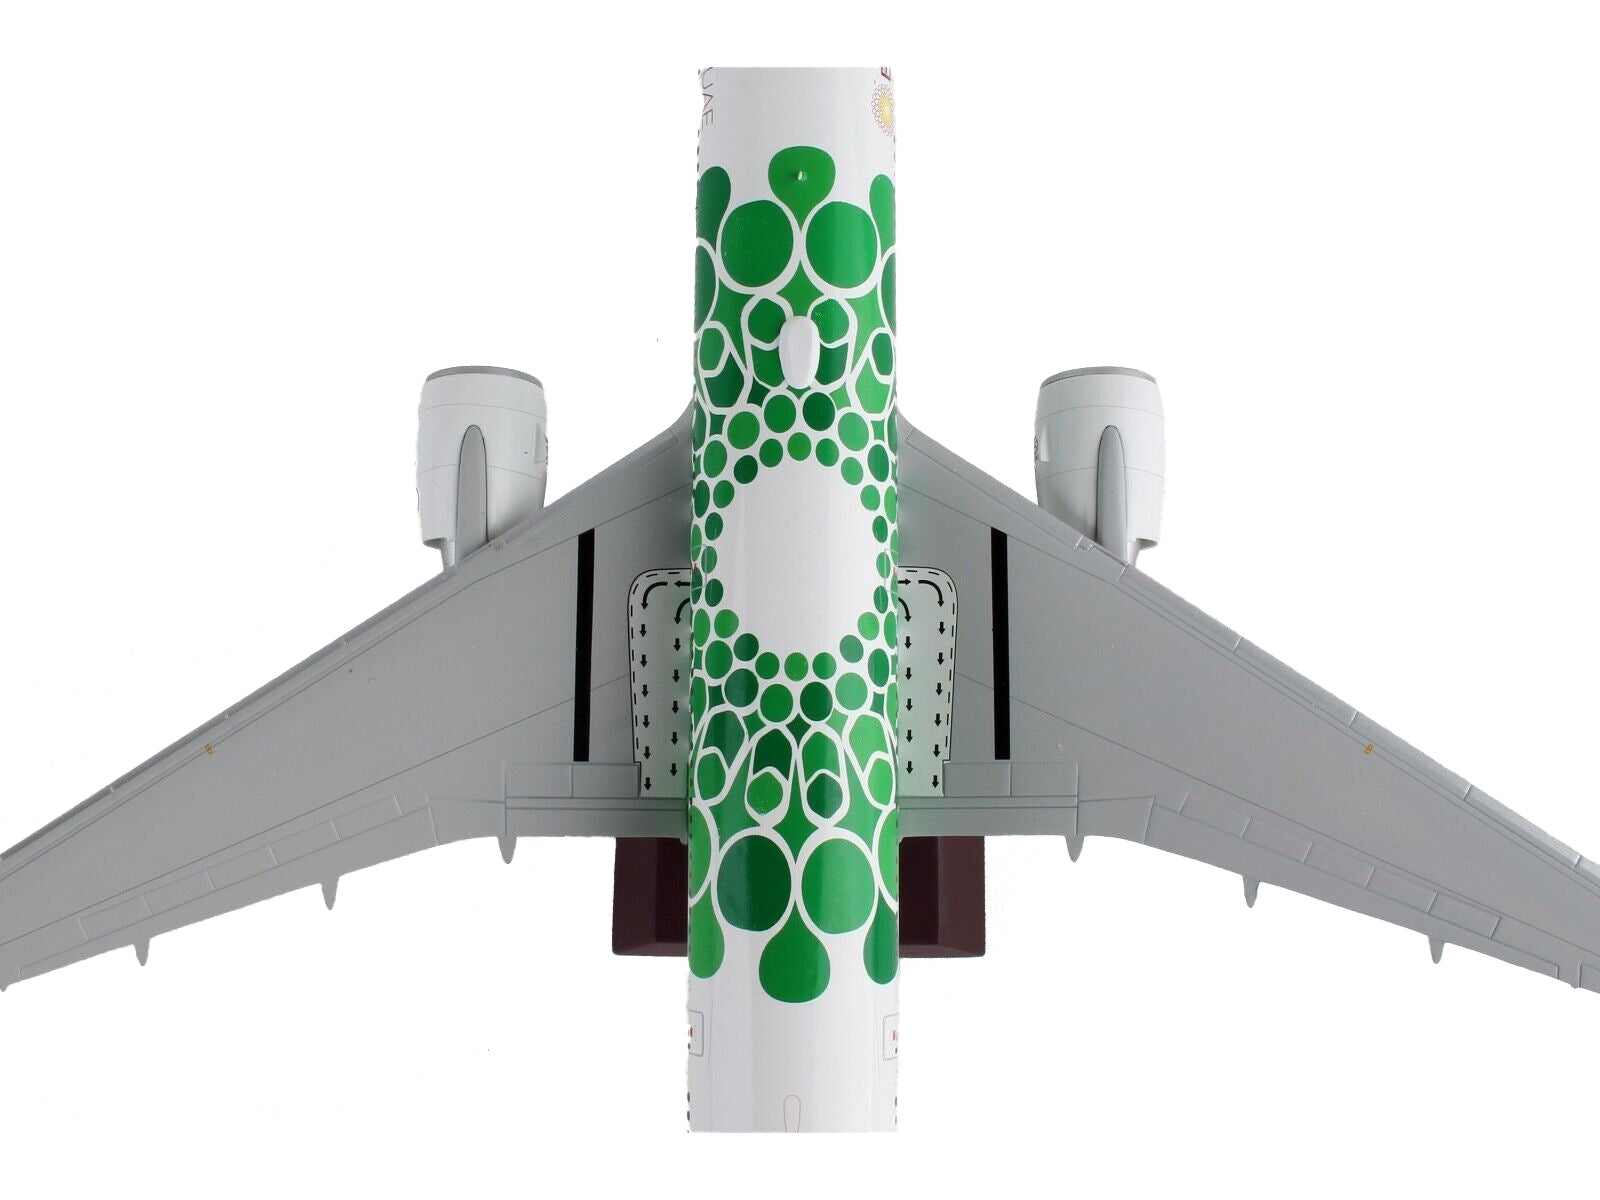 Boeing 777-300ER Commercial Aircraft "Emirates Airlines - Dubai Expo 2020" White with Green Graphics